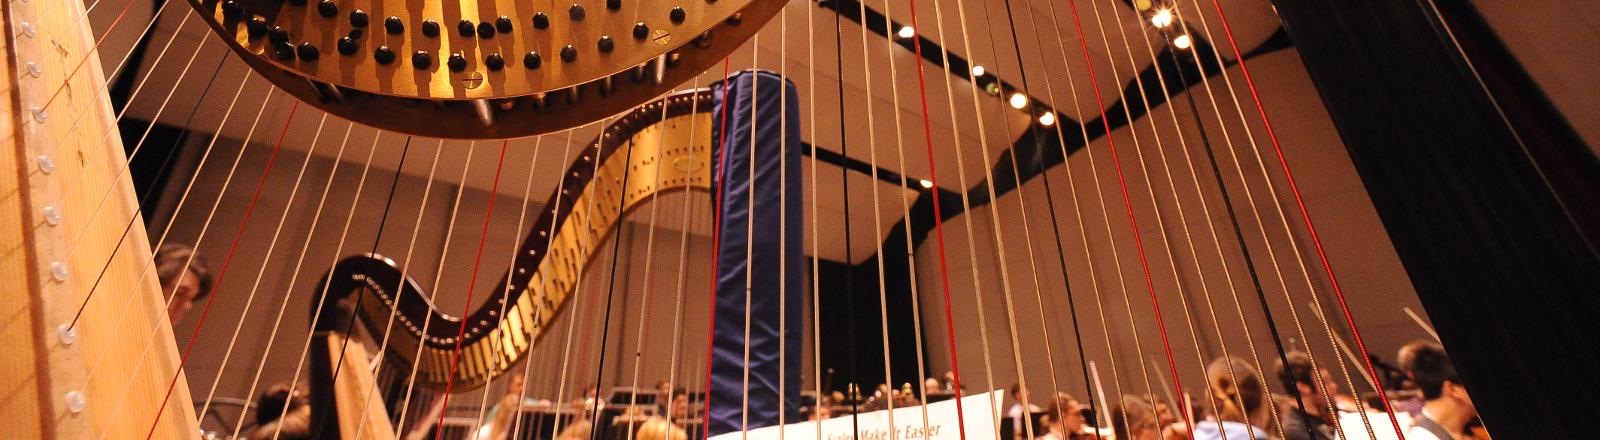 A close up strings of a harp in a concert with loyola students playing in the background